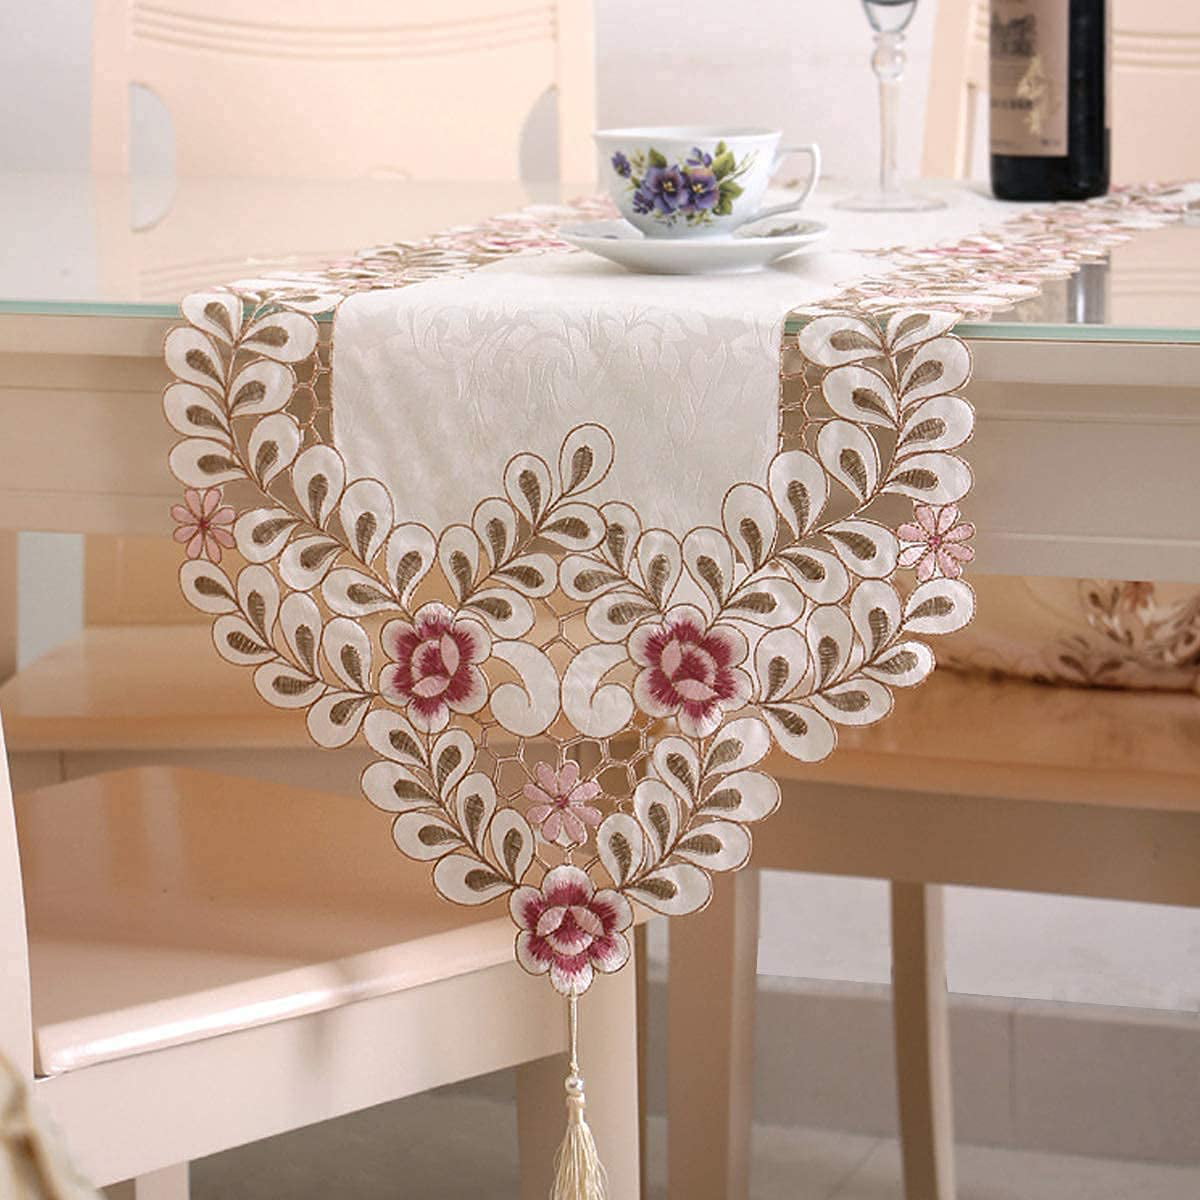 Lace Table Runner Mats Vintage Embroidered Flower Heart Doily Dining Room Decor